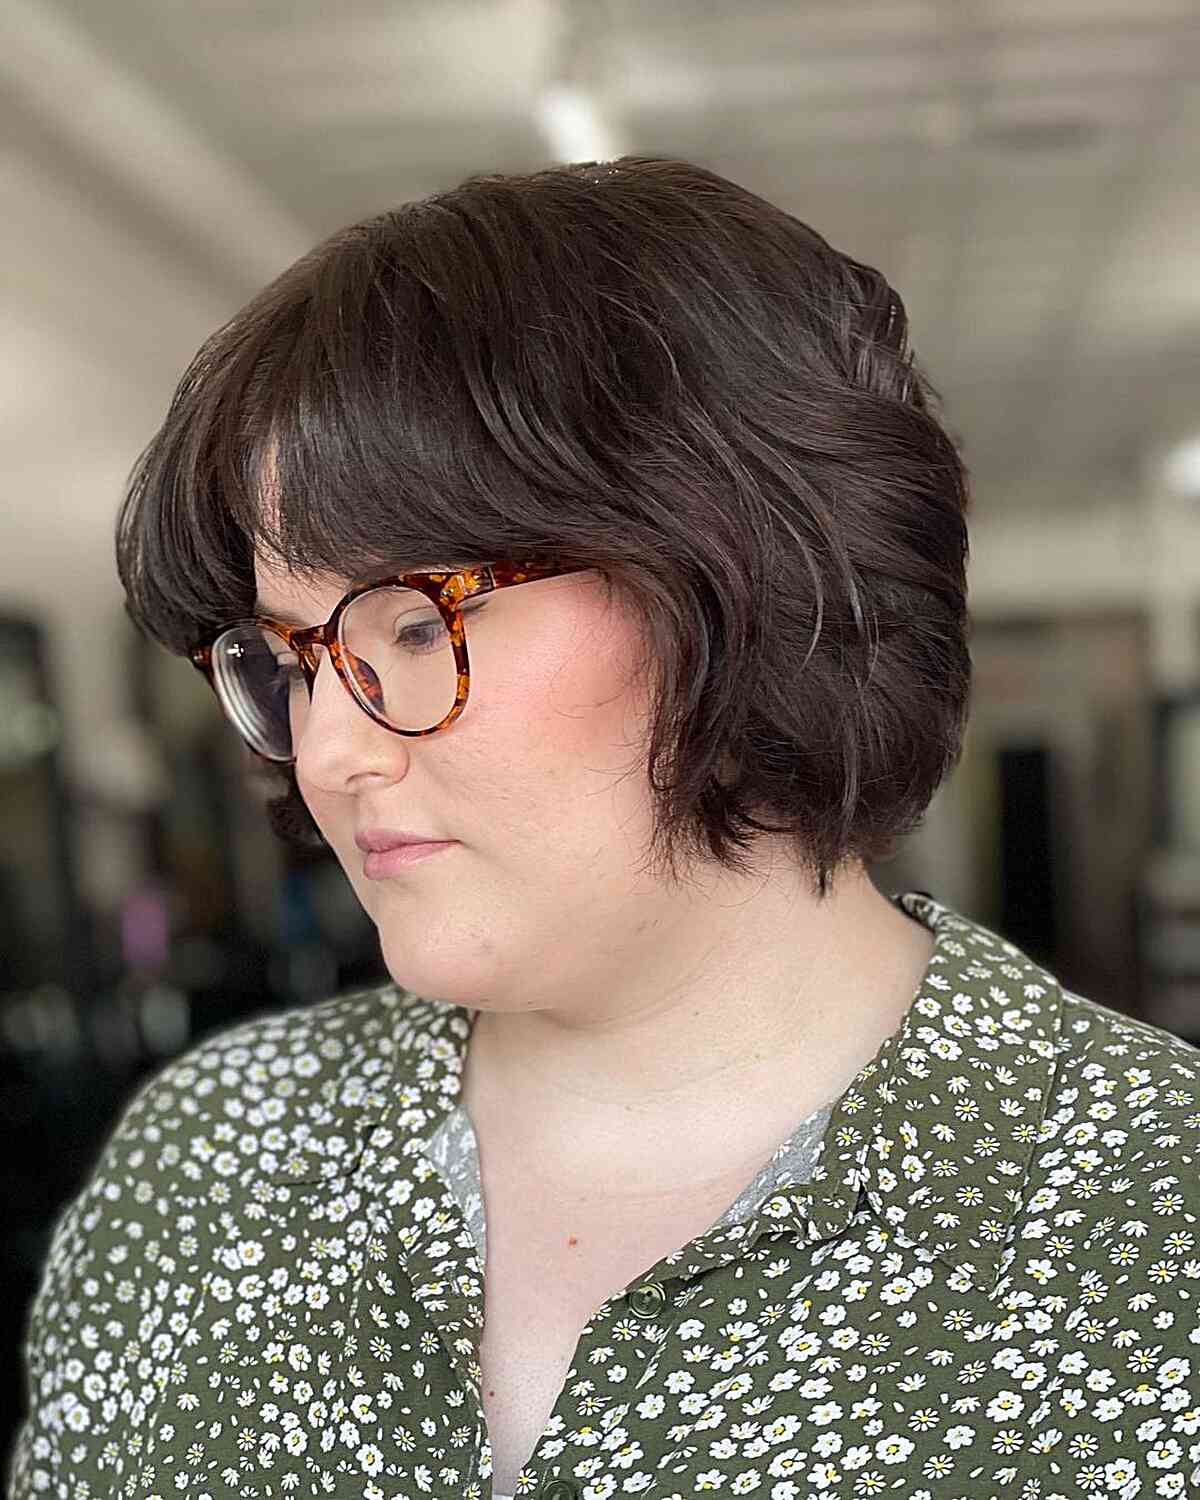 Cute Bixie for Thick Hair and Glasses for girls with round faces